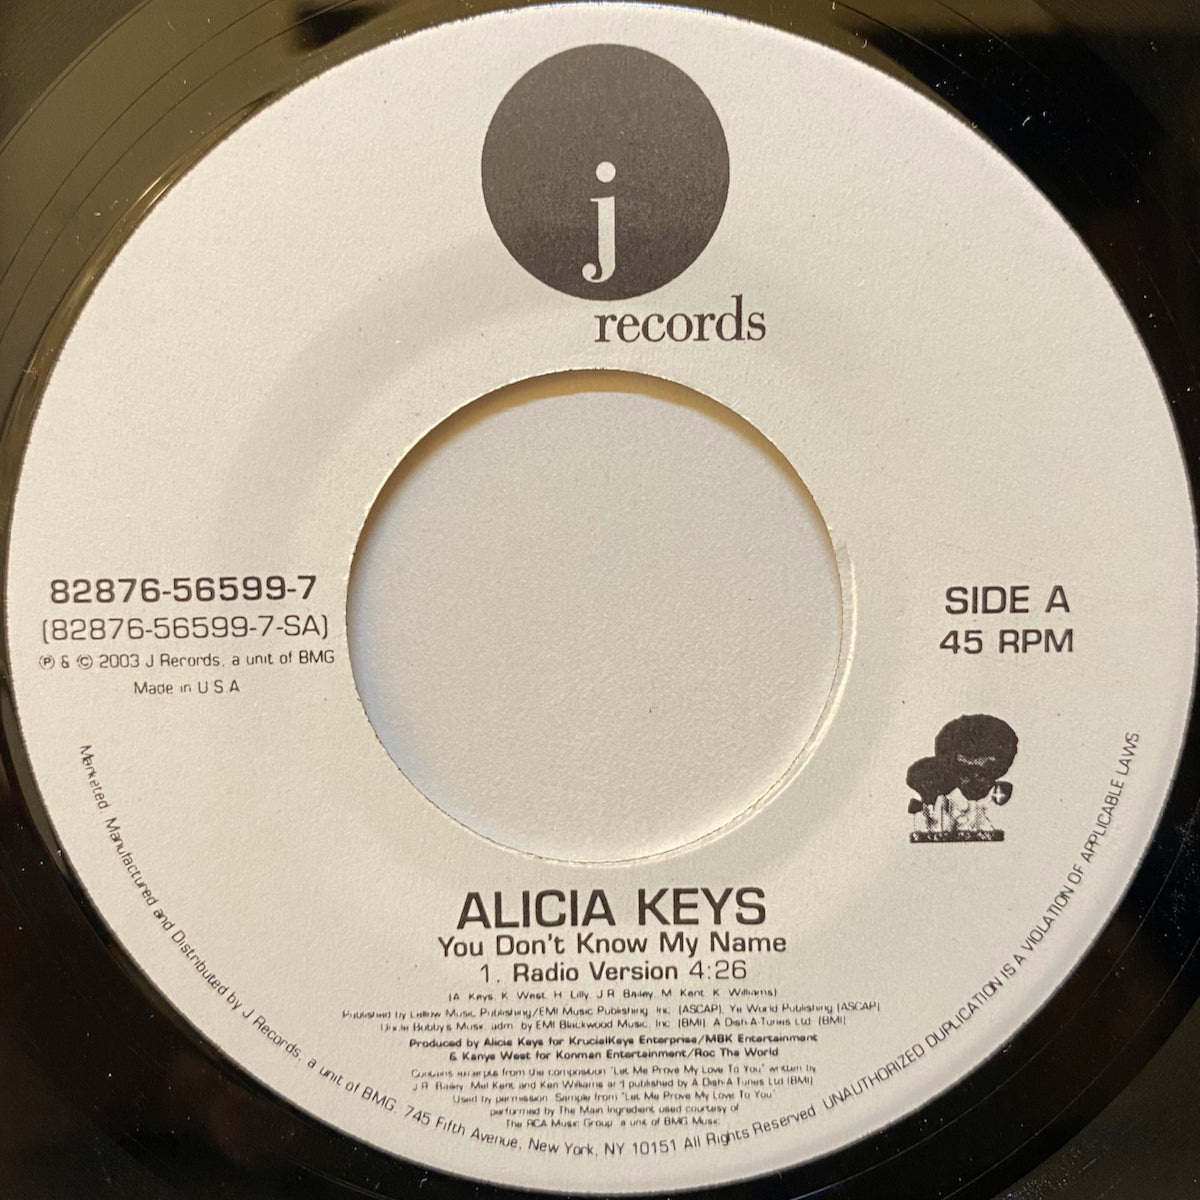 Alicia Keys / You Don't Know My Name | VINYL7 RECORDS